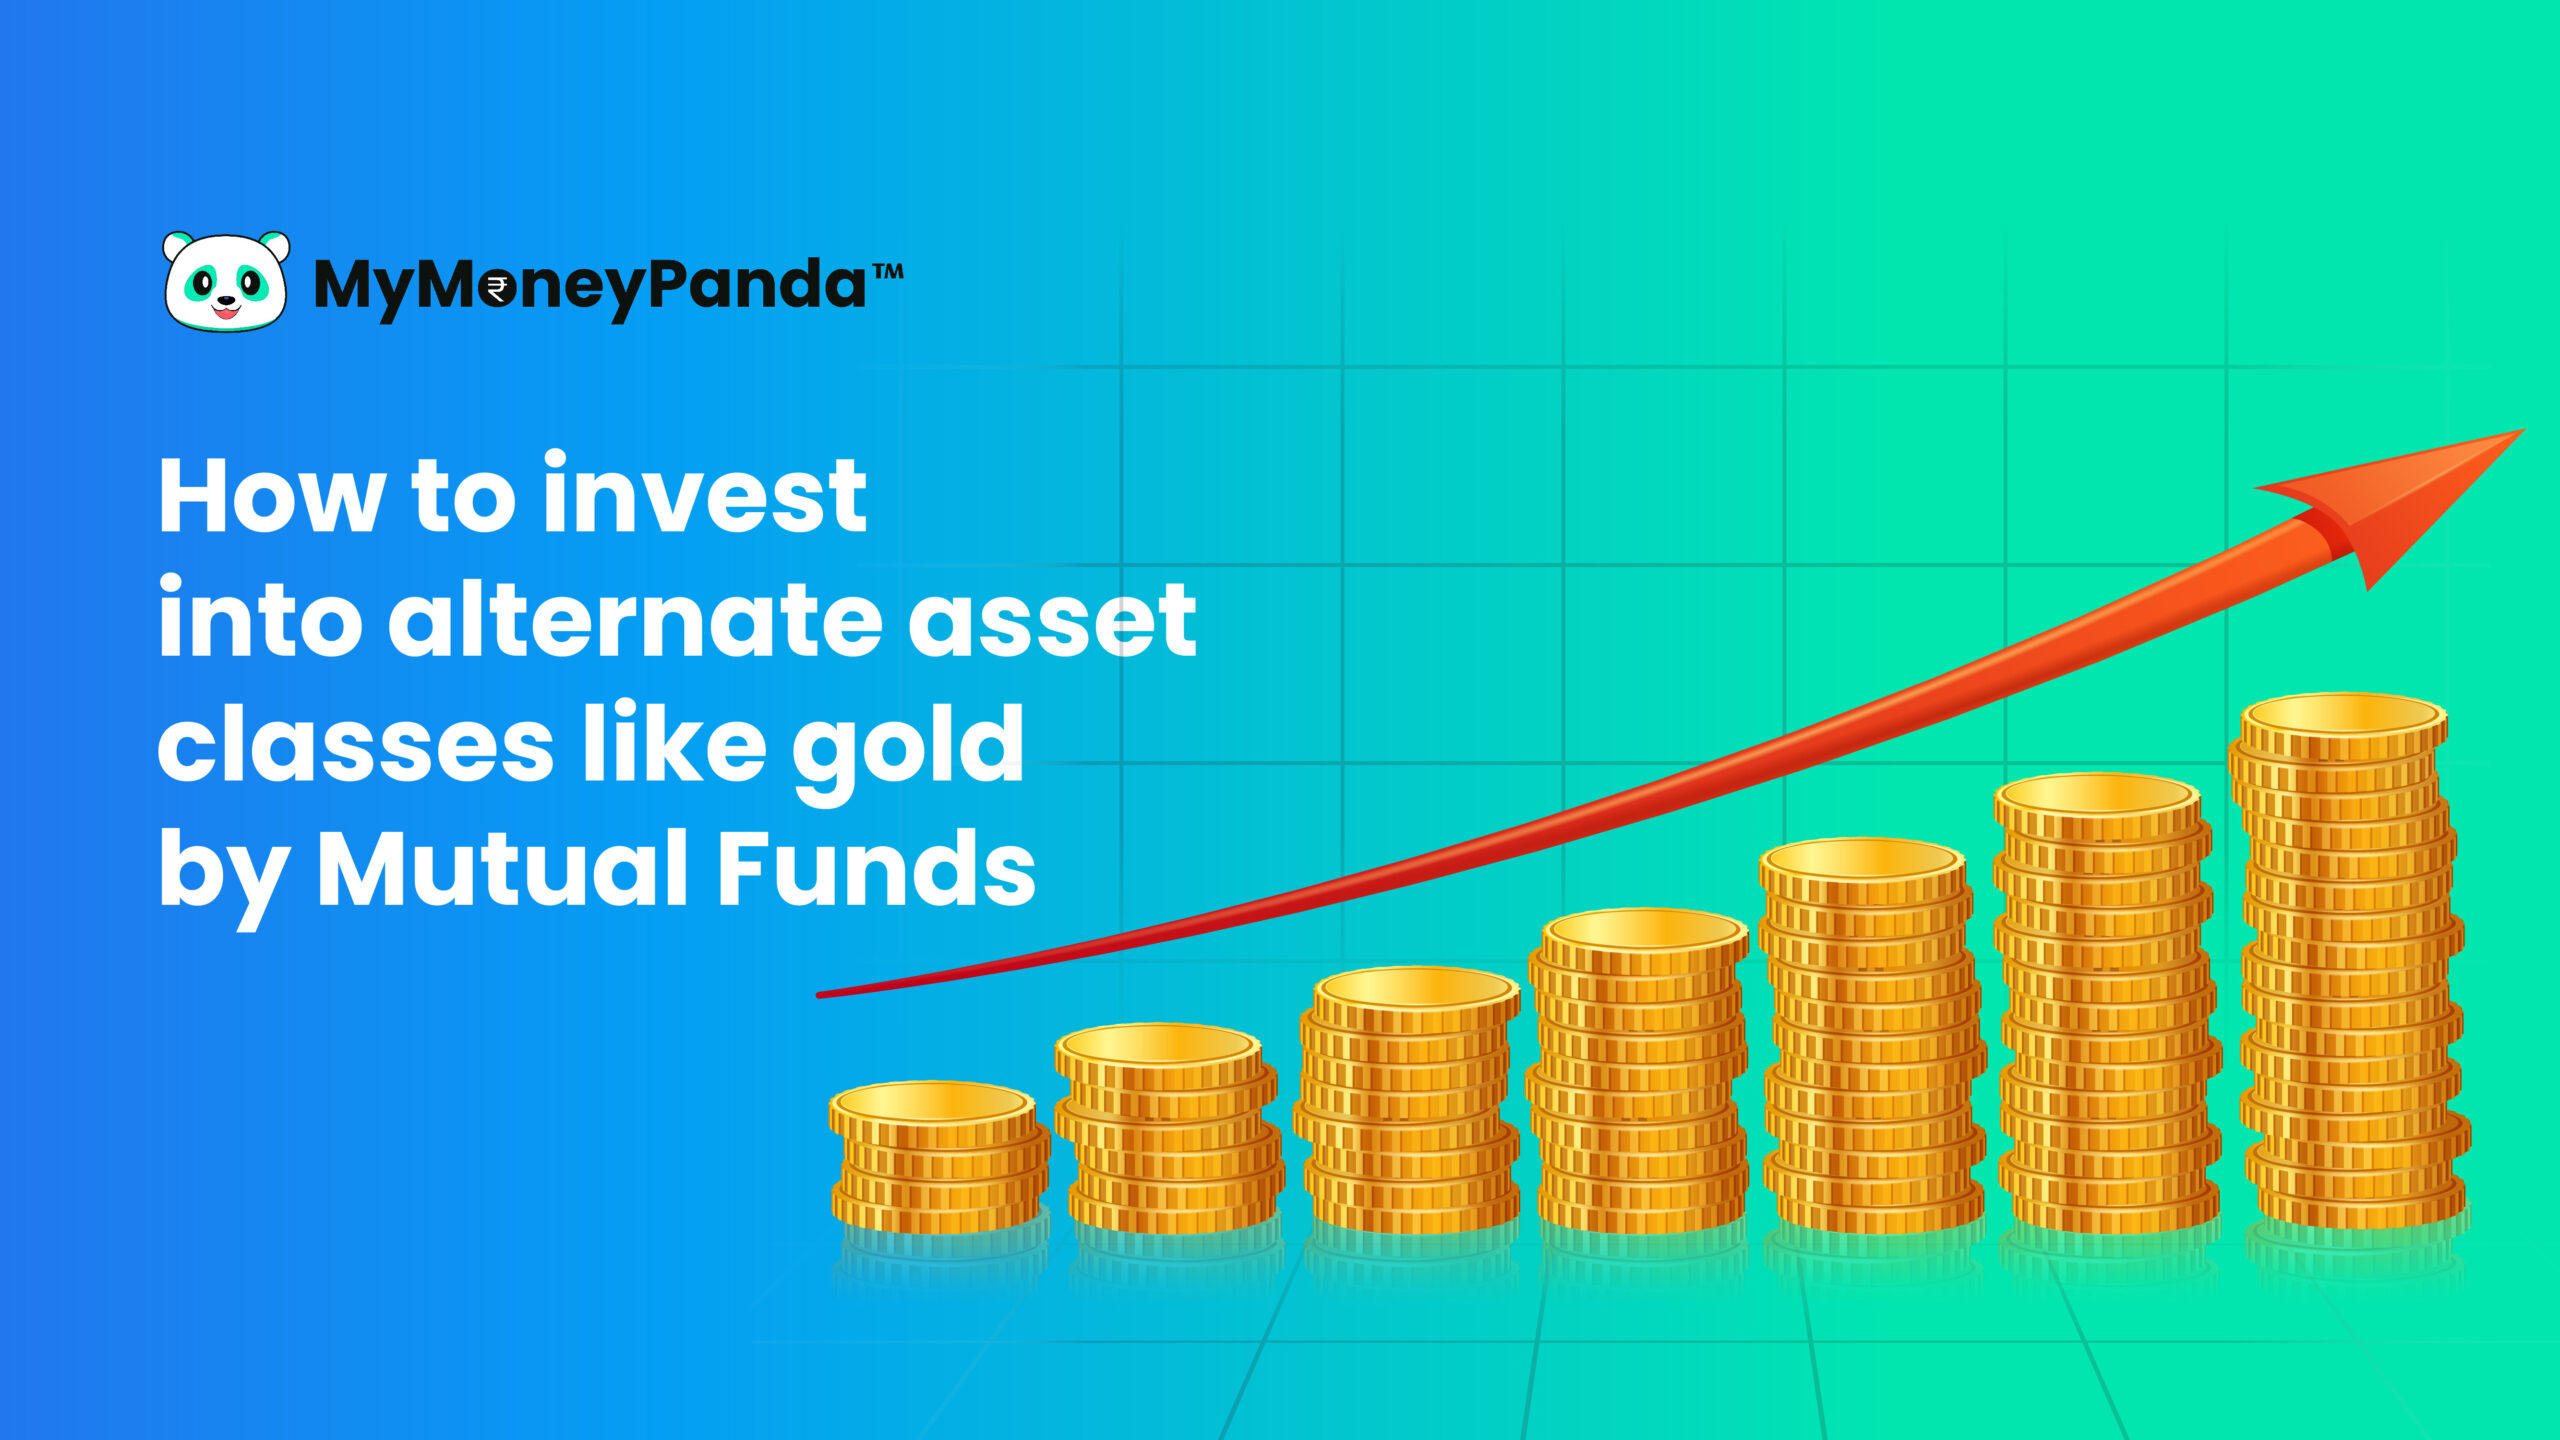 gold by Mutual Funds